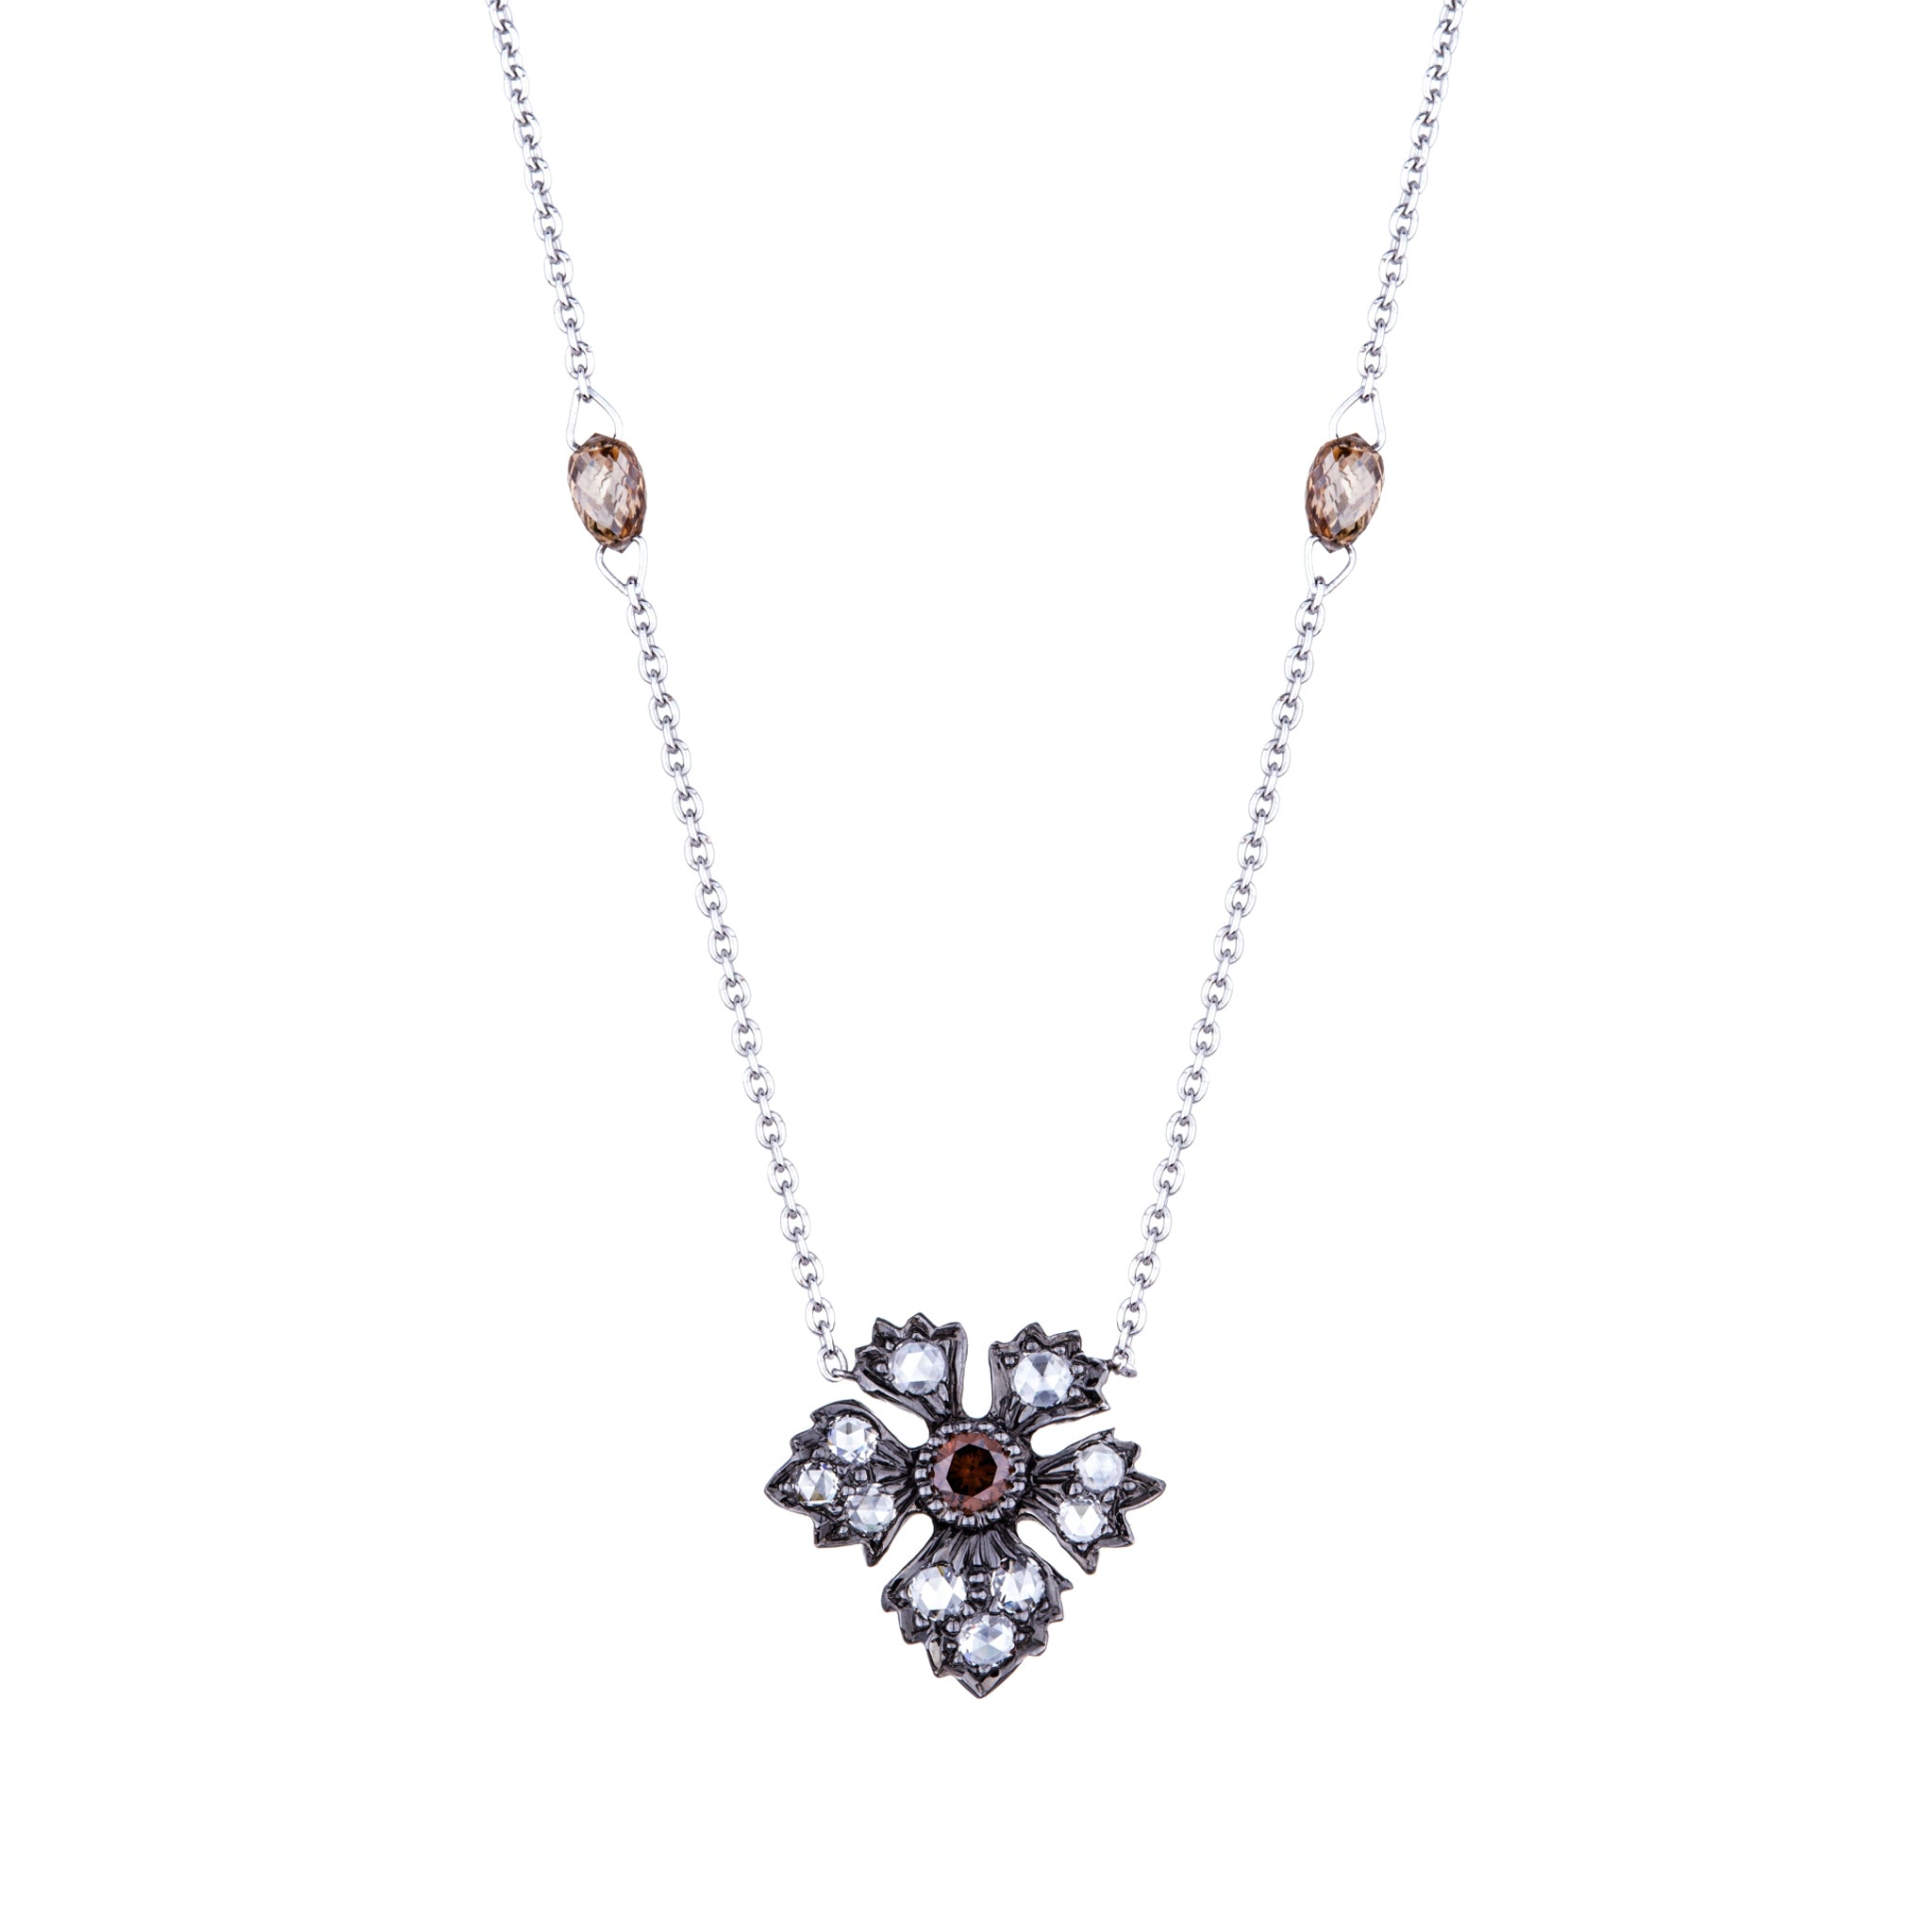 Enchanted Garden Champagne Briolette and Rose Cut Diamond Necklace